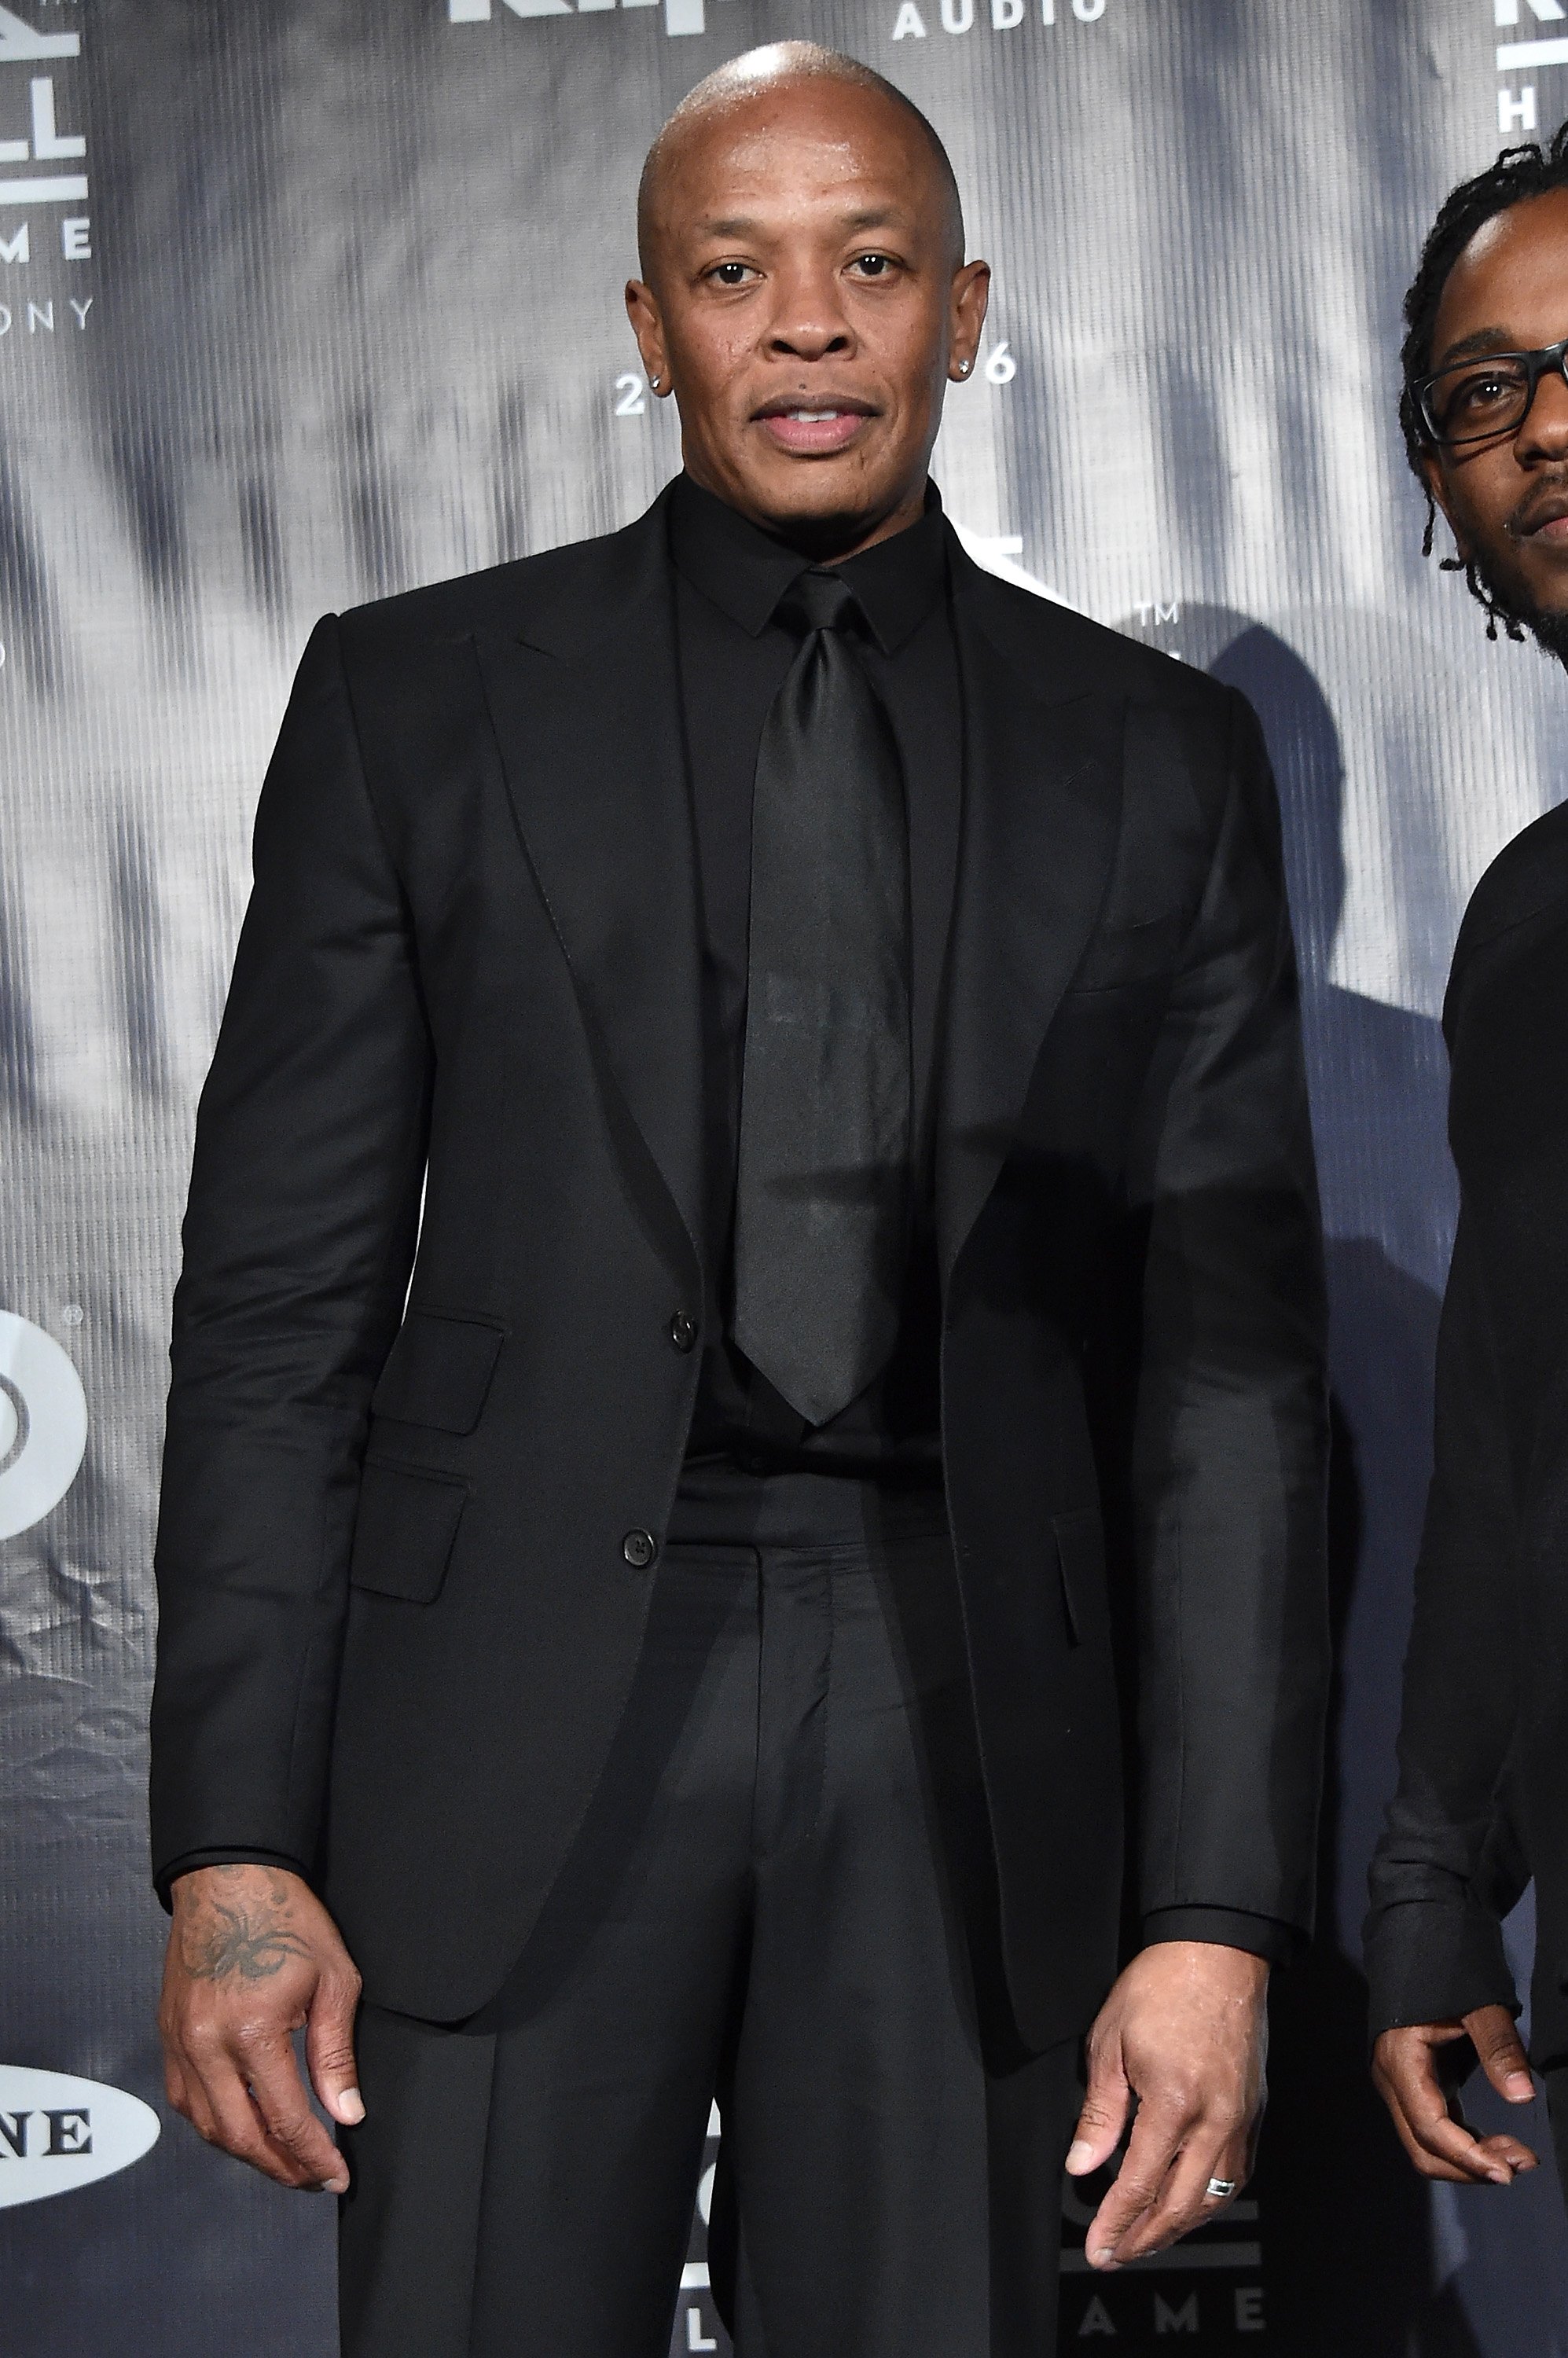 Dr. Dre poses in the 31st Annual Rock And Roll Hall Of Fame Induction Ceremony at Barclays Center on April 8, 2016 in New York City